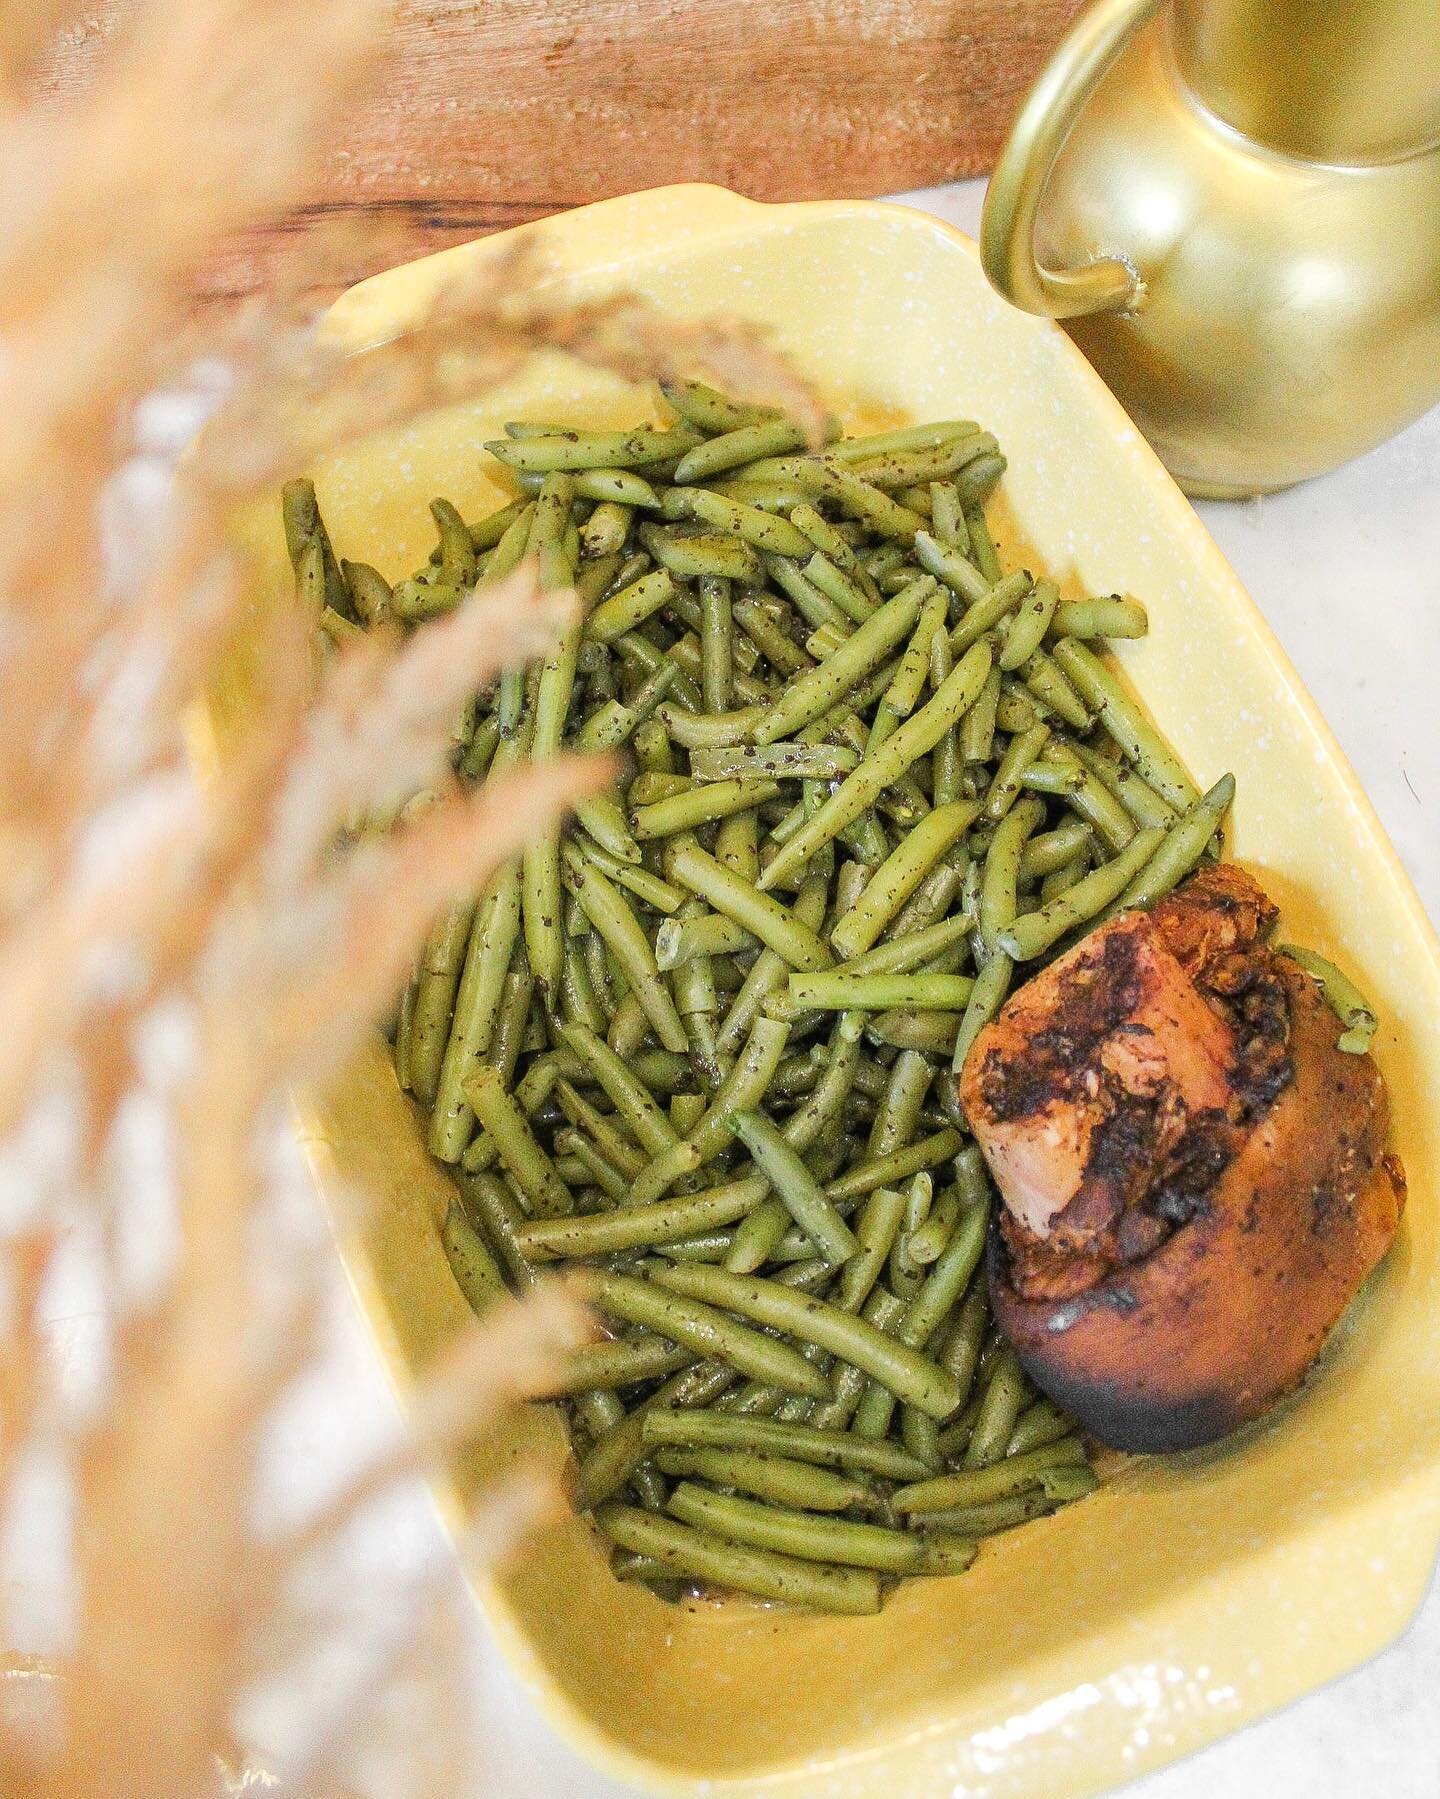 These delicious southern green beans are savory, mouthwatering, and comforting with the flavors of smoky ham hock and spices for a running through for a traditional, flavorful Southern side dish! This dish will be available the end of this week. 

No